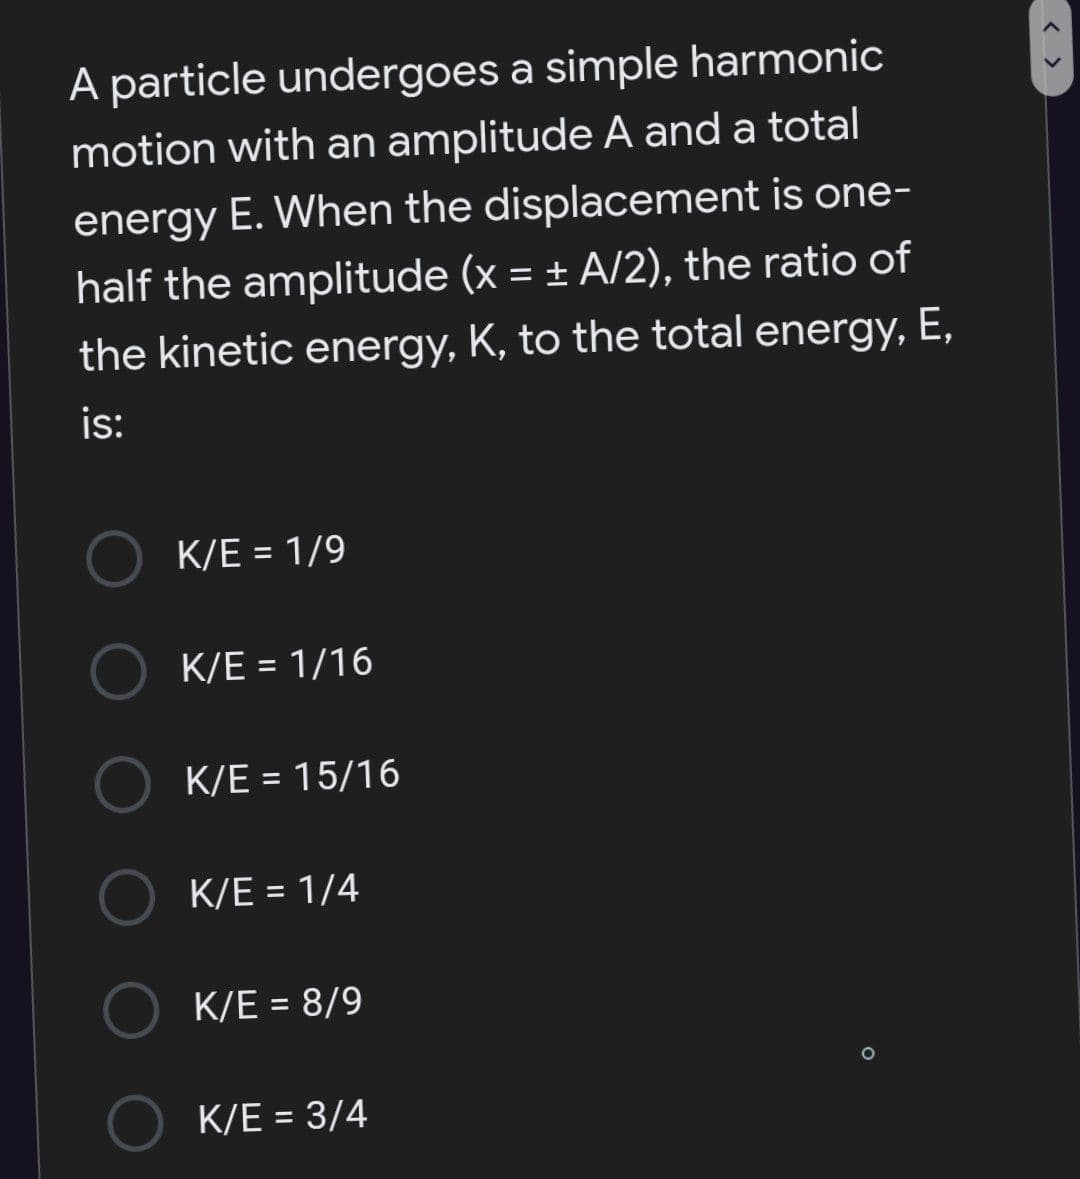 A particle undergoes a simple harmonic
motion with an amplitude A and a total
energy E. When the displacement is one-
half the amplitude (x = ± A/2), the ratio of
the kinetic energy, K, to the total energy, E,
is:
K/E = 1/9
%3D
K/E = 1/16
%3D
K/E = 15/16
%3D
K/E = 1/4
%3D
K/E = 8/9
K/E = 3/4
